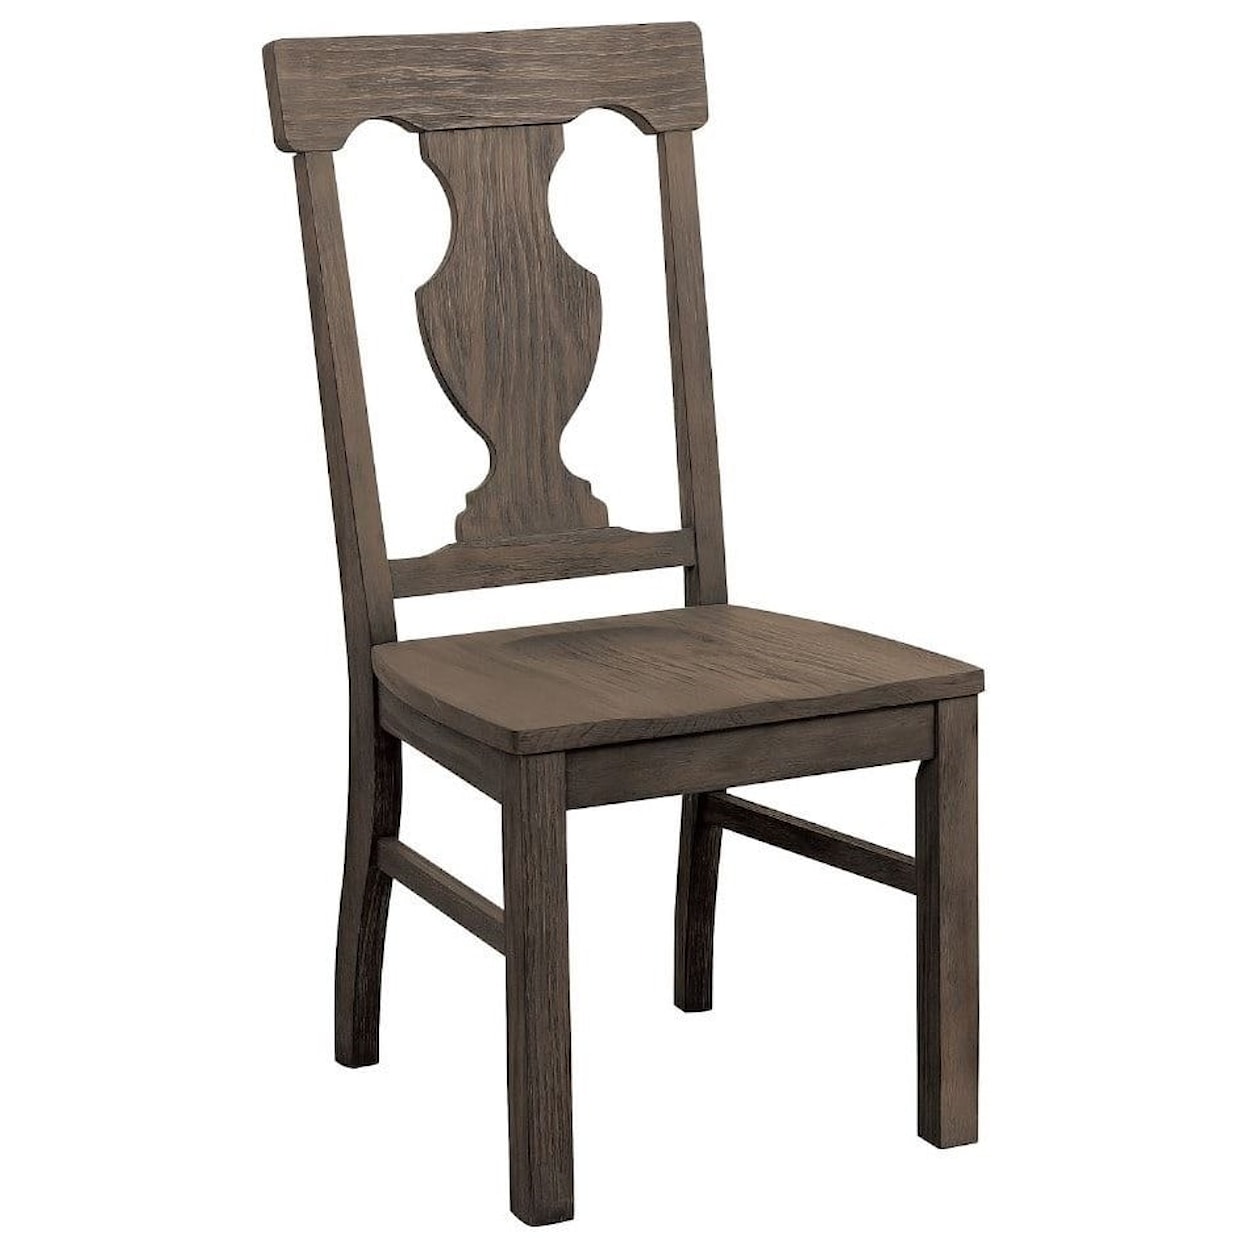 Homelegance Toulon Side Chair